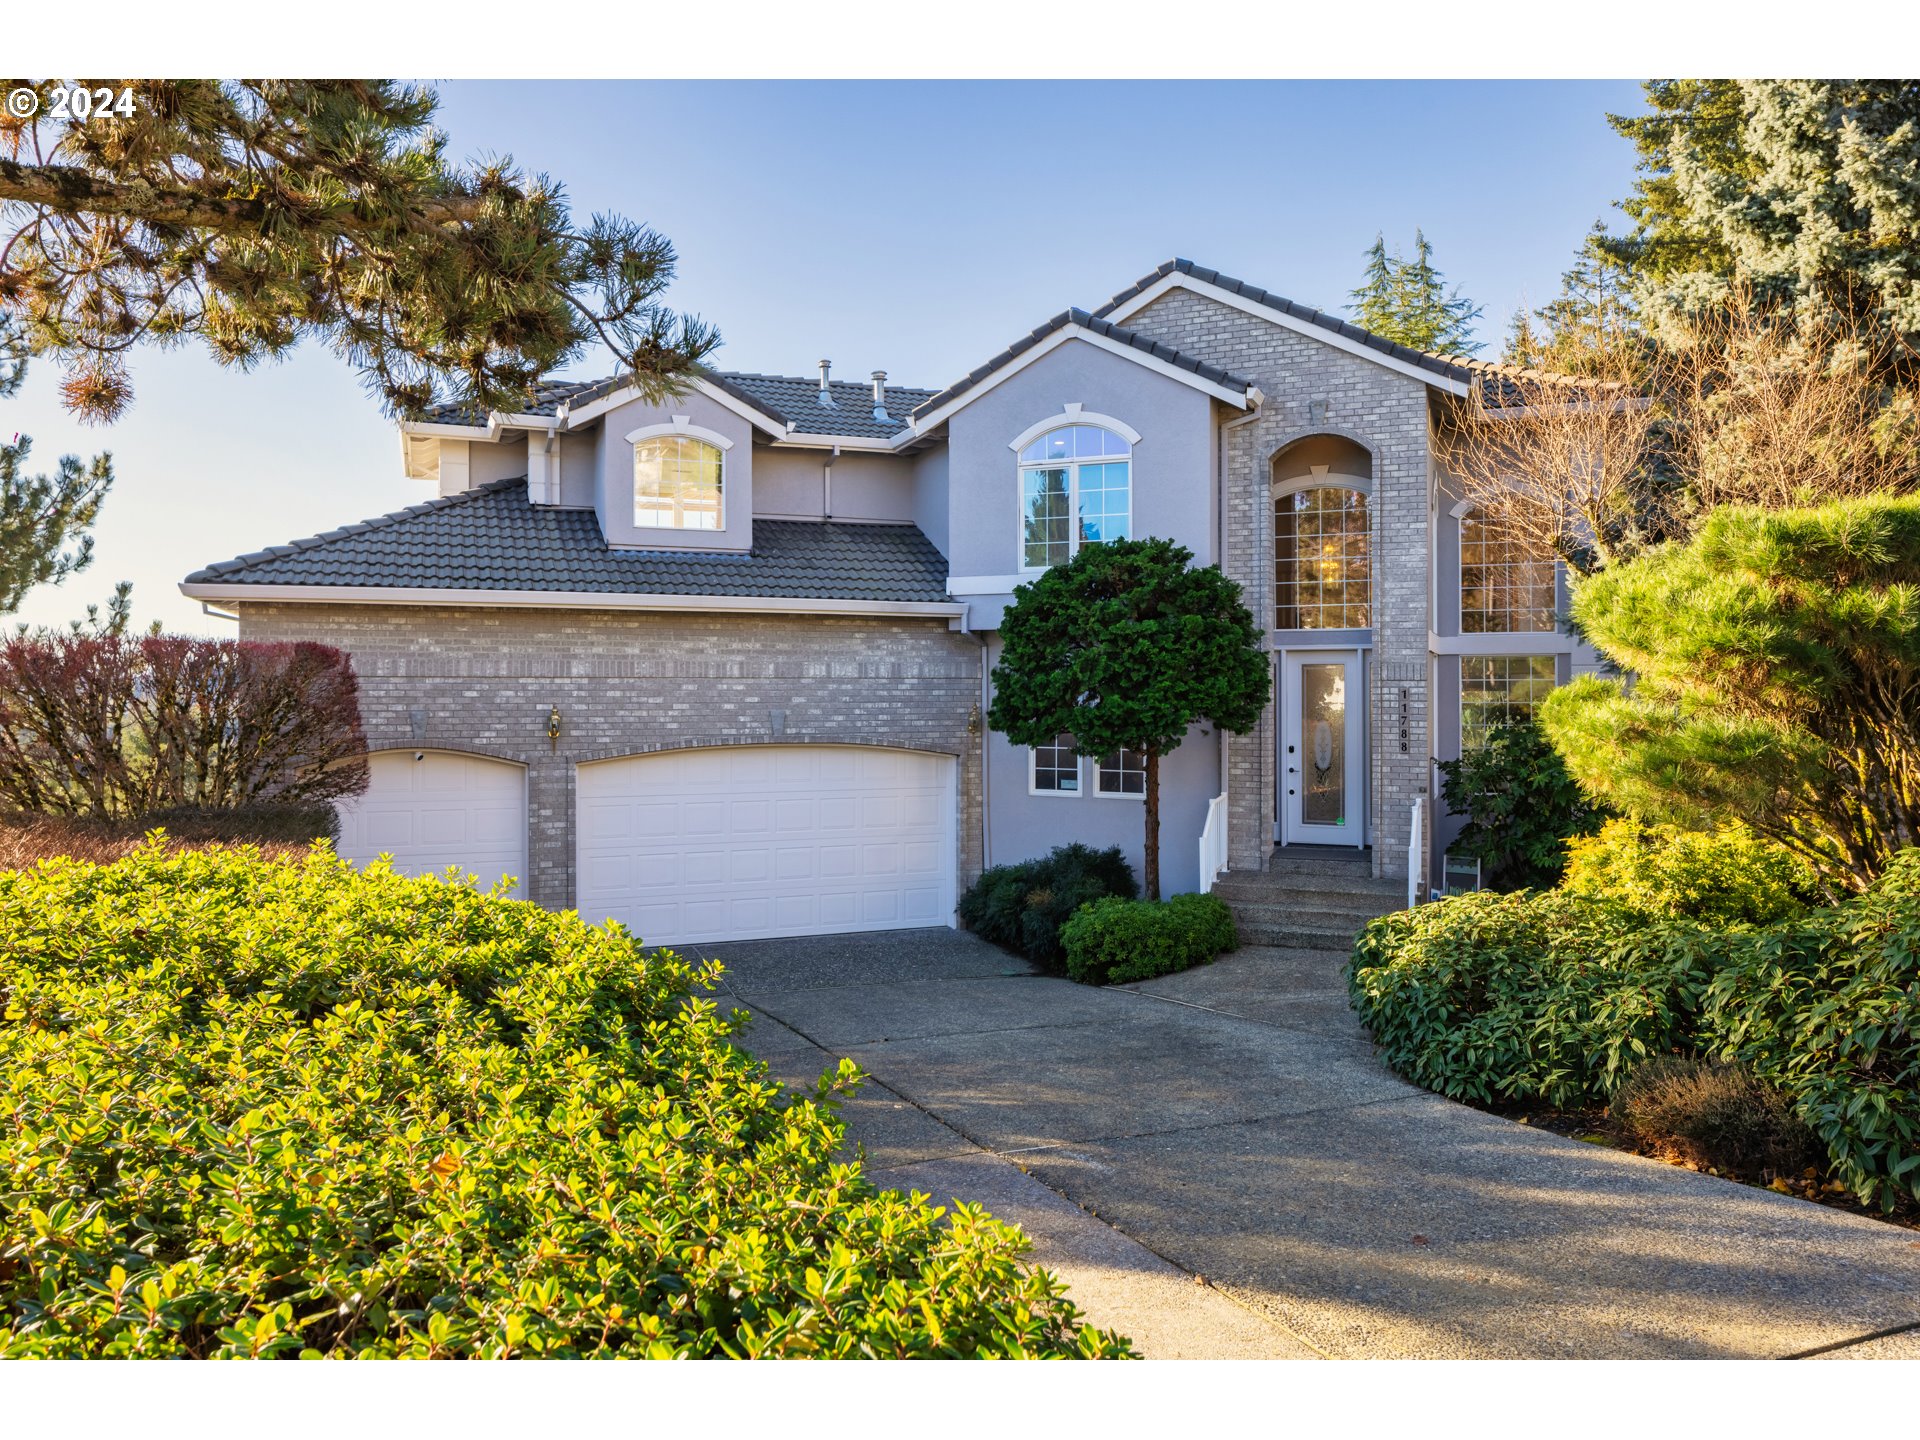 11788 SE SOVEREIGN CT, Happy Valley, OR 